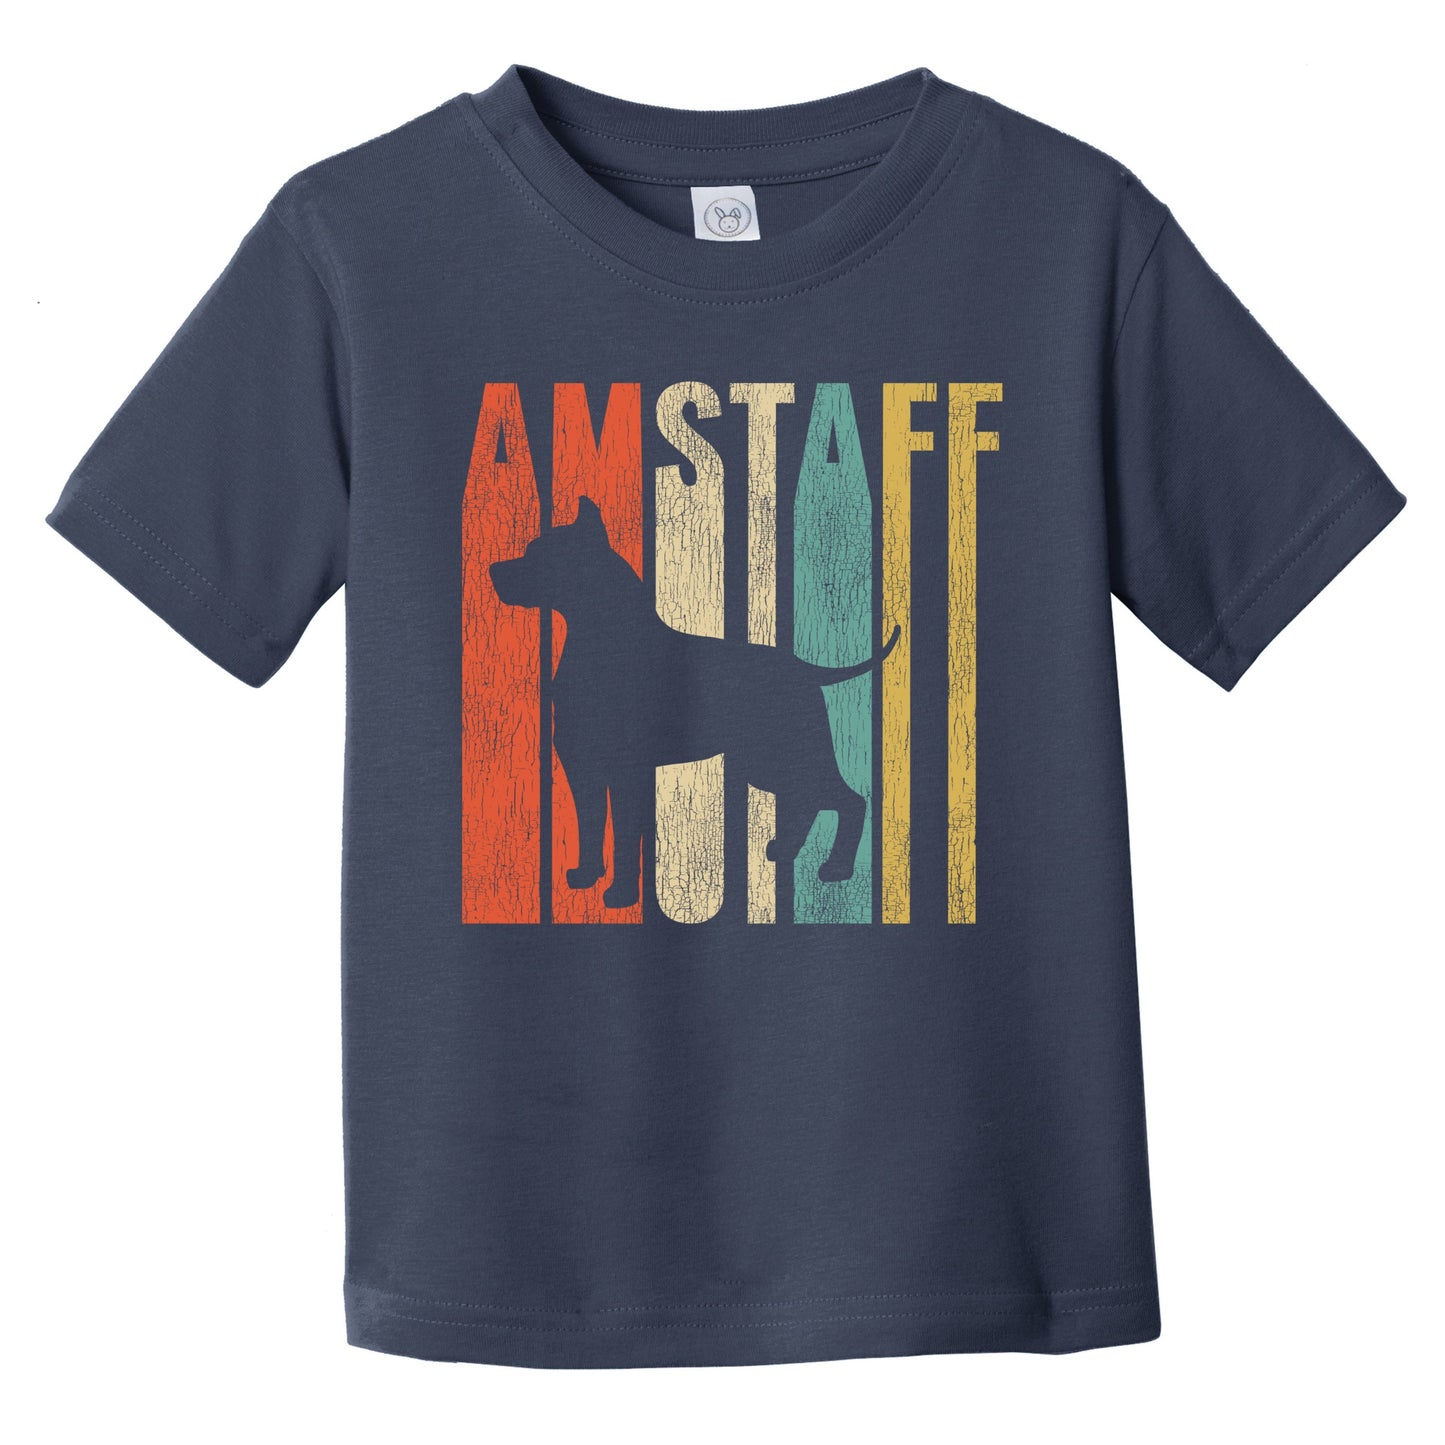 Retro AmStaff Dog Silhouette American Staffordshire Terrier Cracked Distressed Infant Toddler T-Shirt